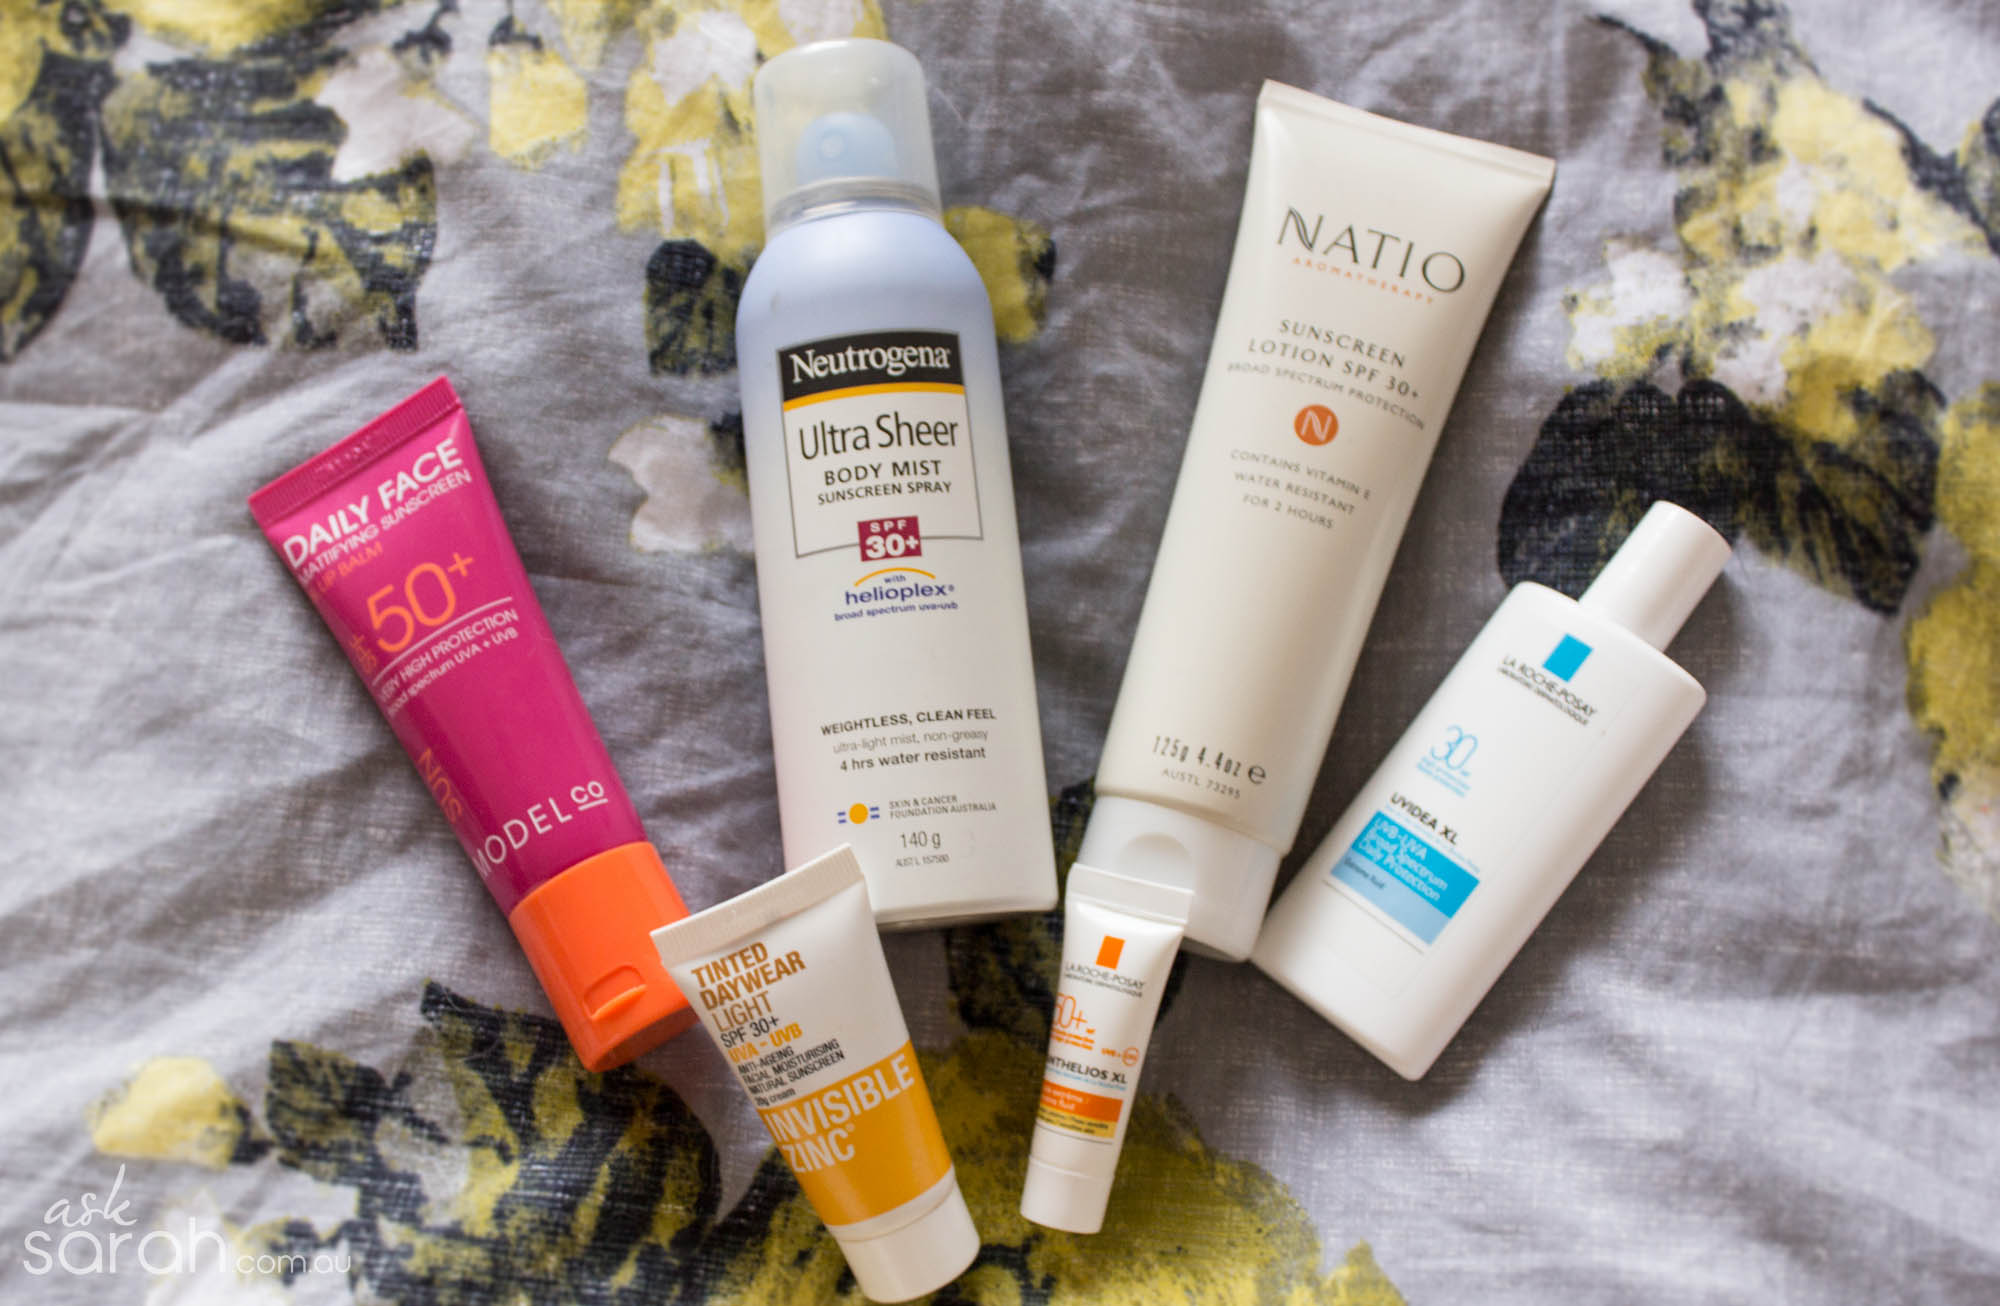 My Top Daily Sunscreens for Face & Body